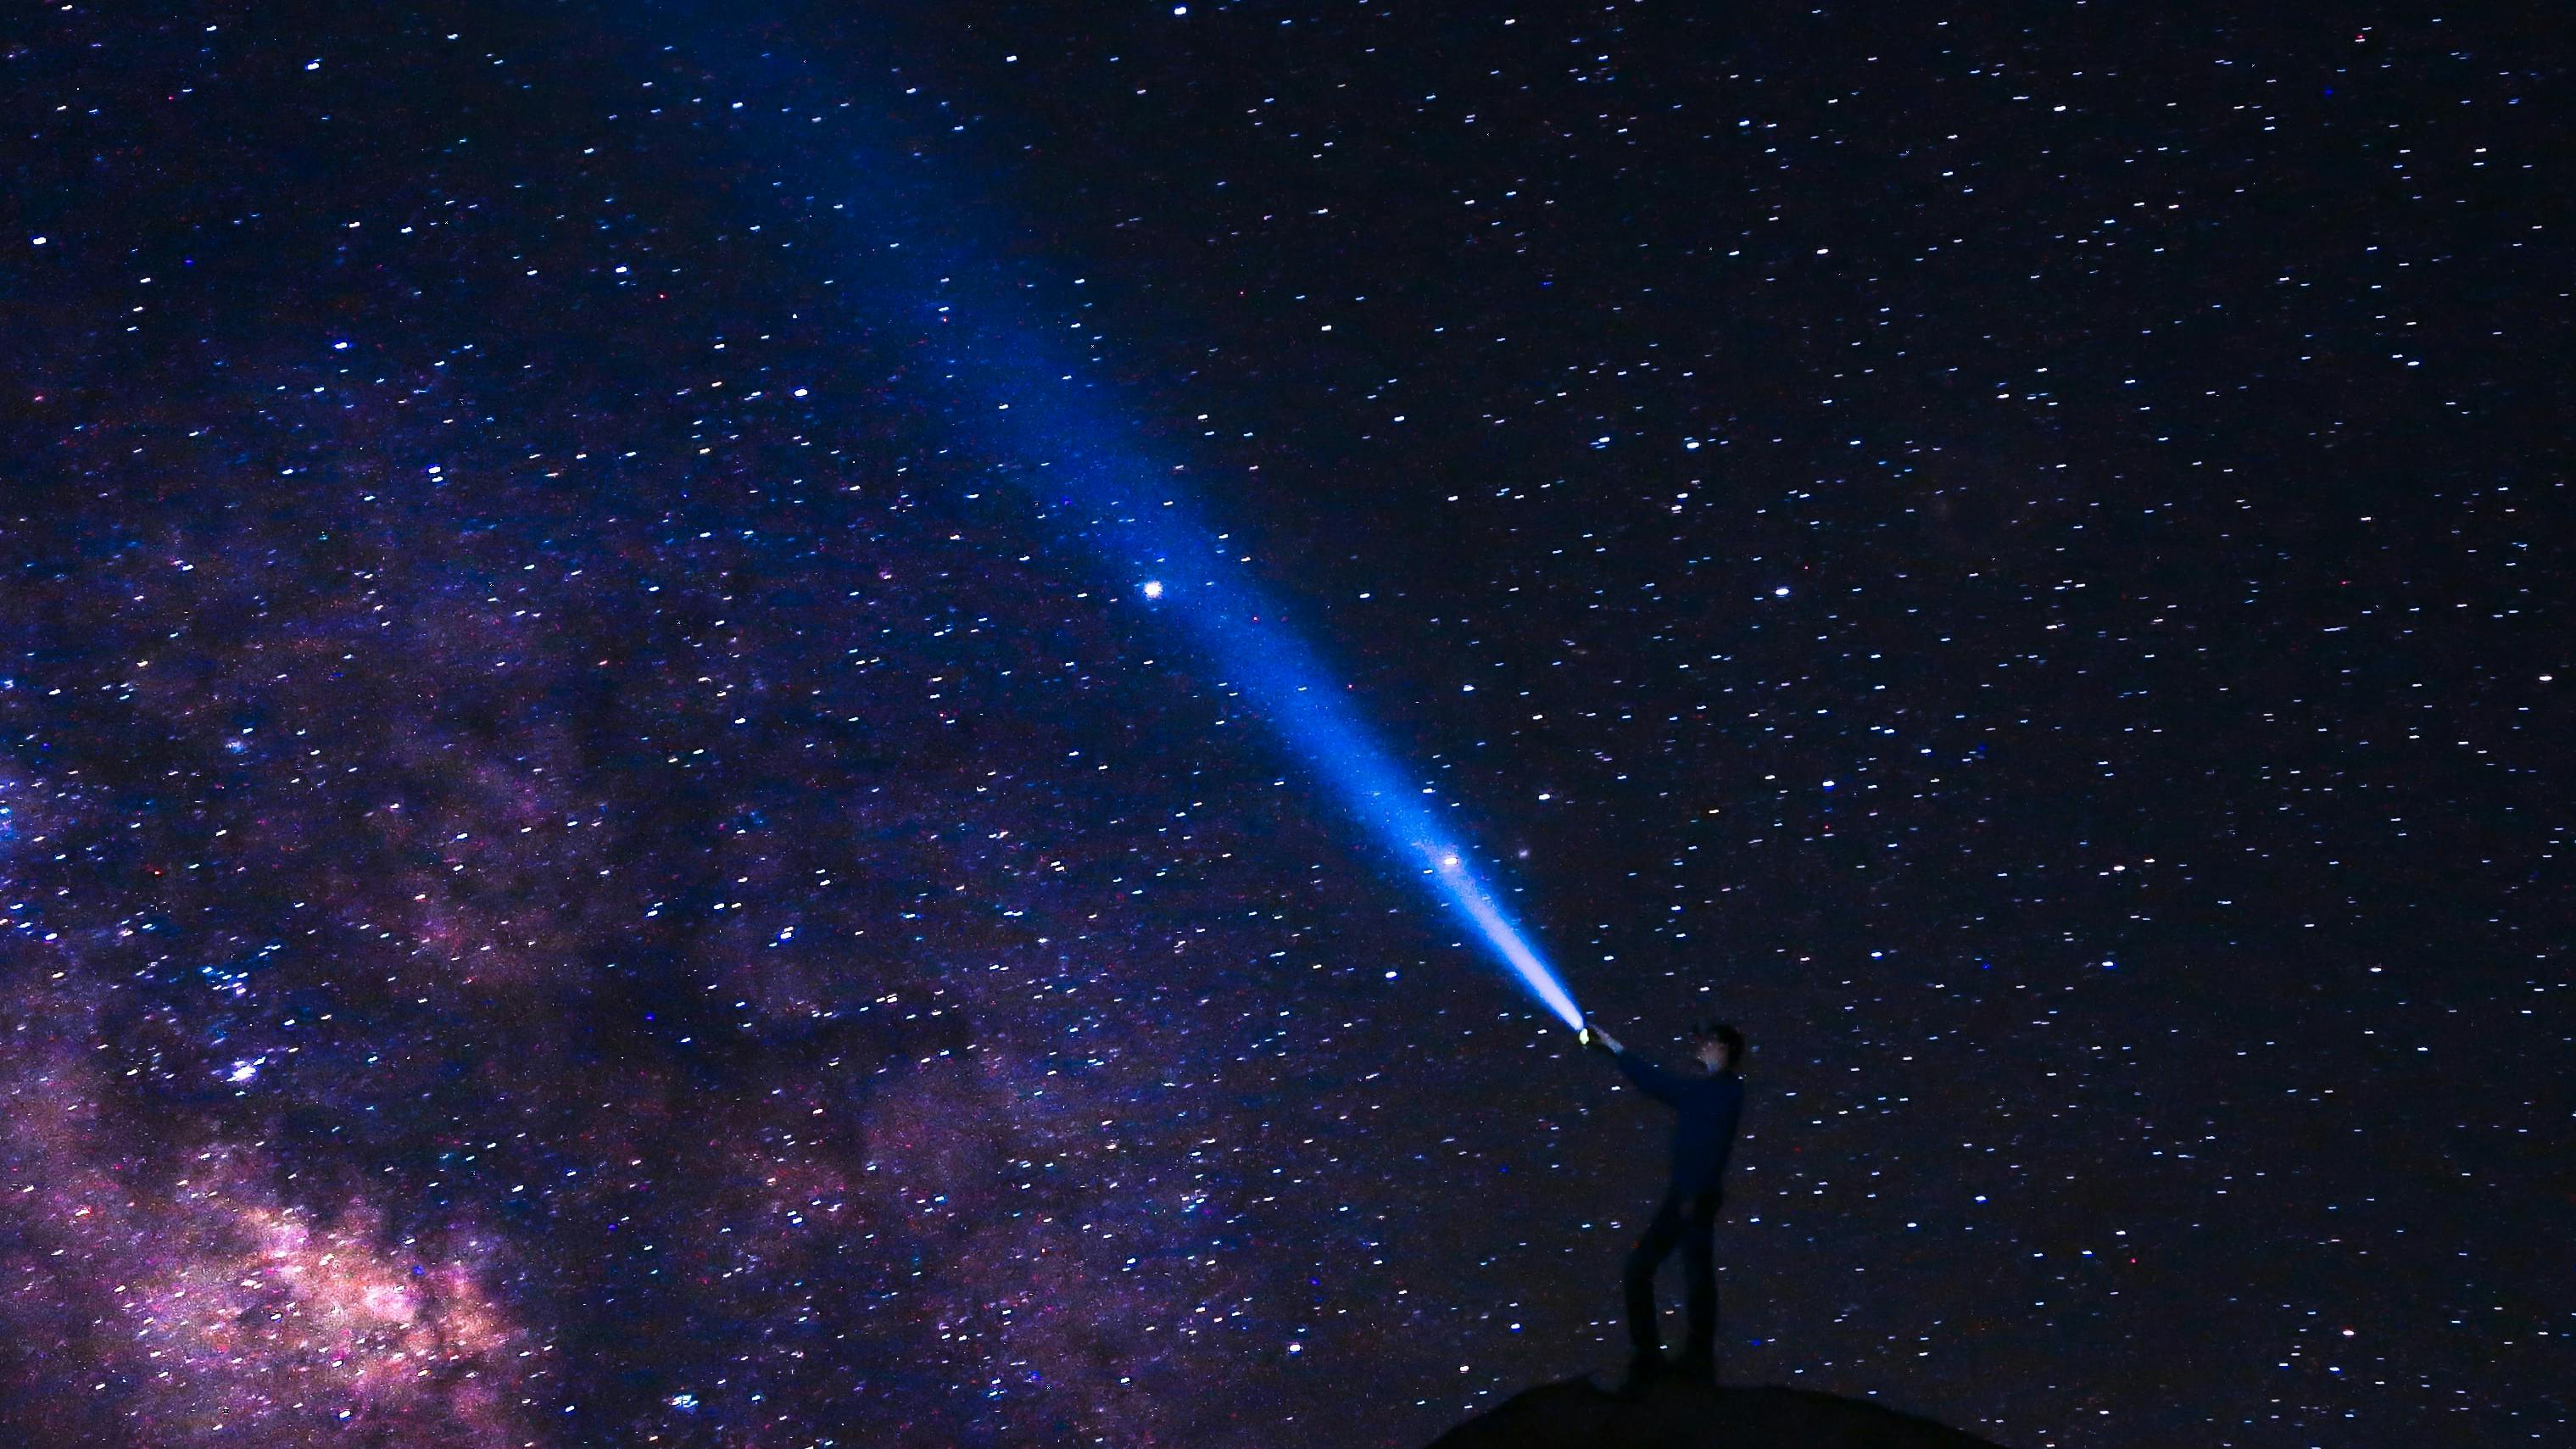 A person shines a flashlight against a dramatic starry night sky